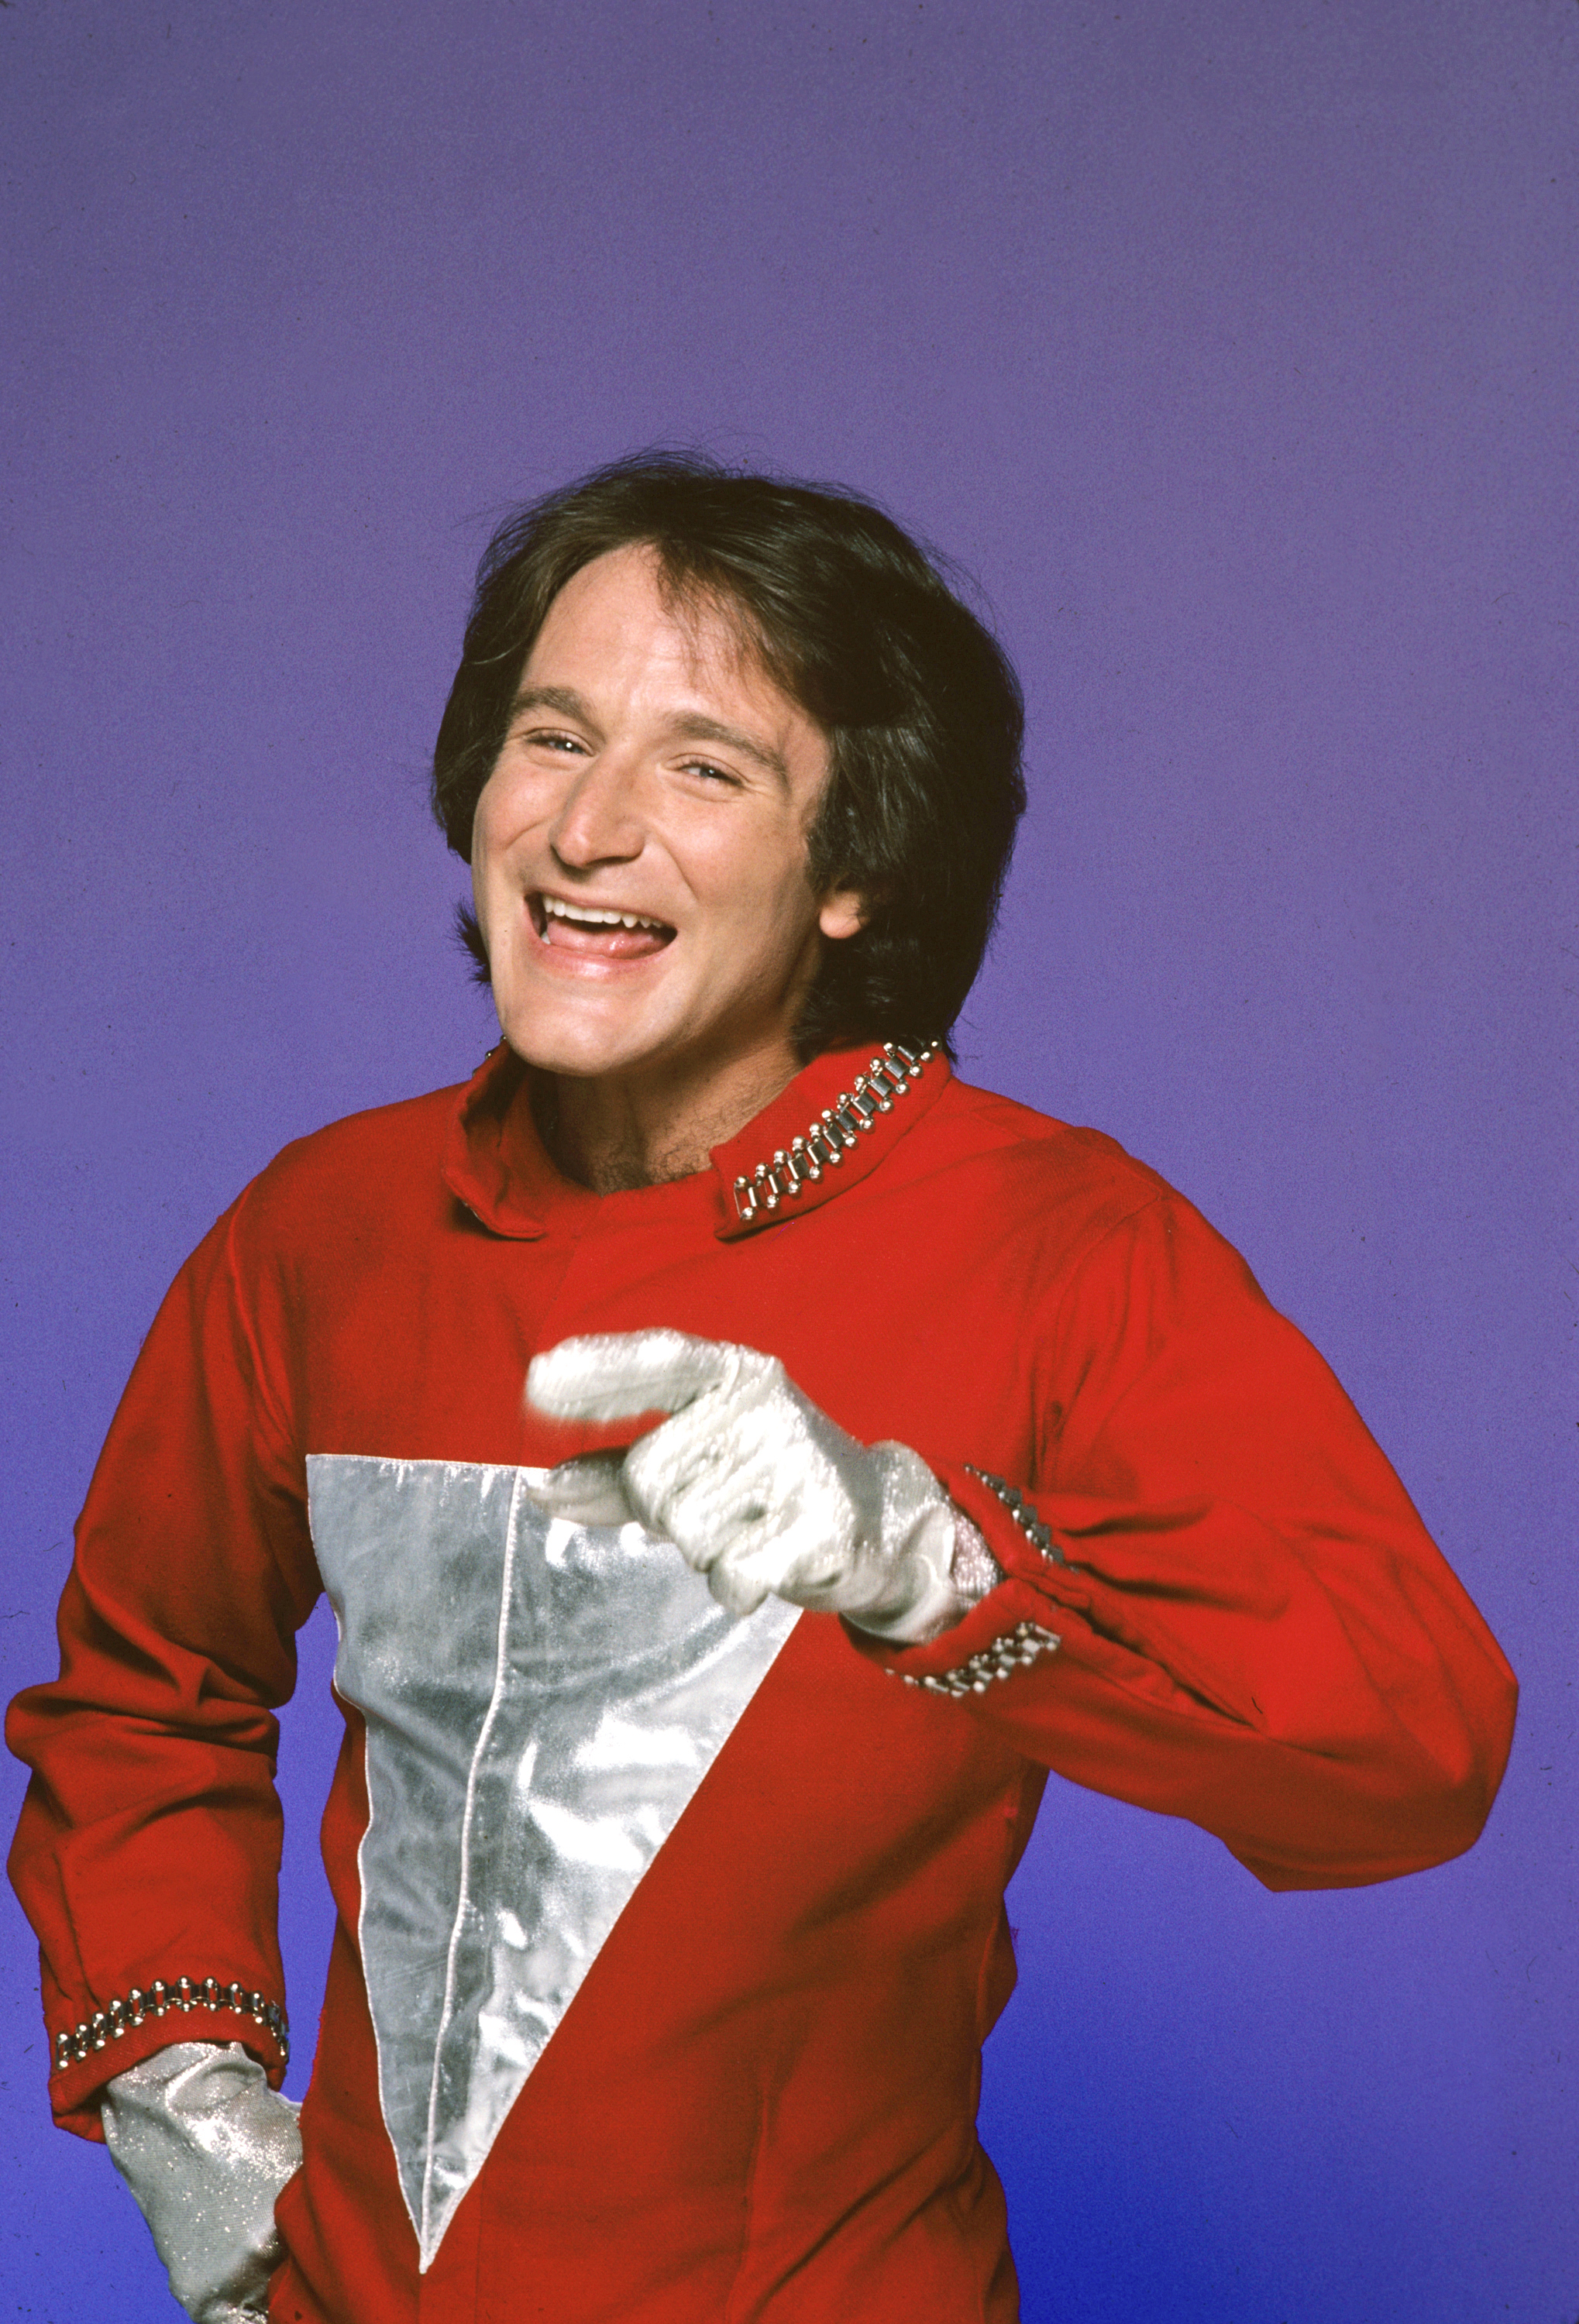 Robin Williams on "Mork and Mindy" in 1978 | Source: Getty Images